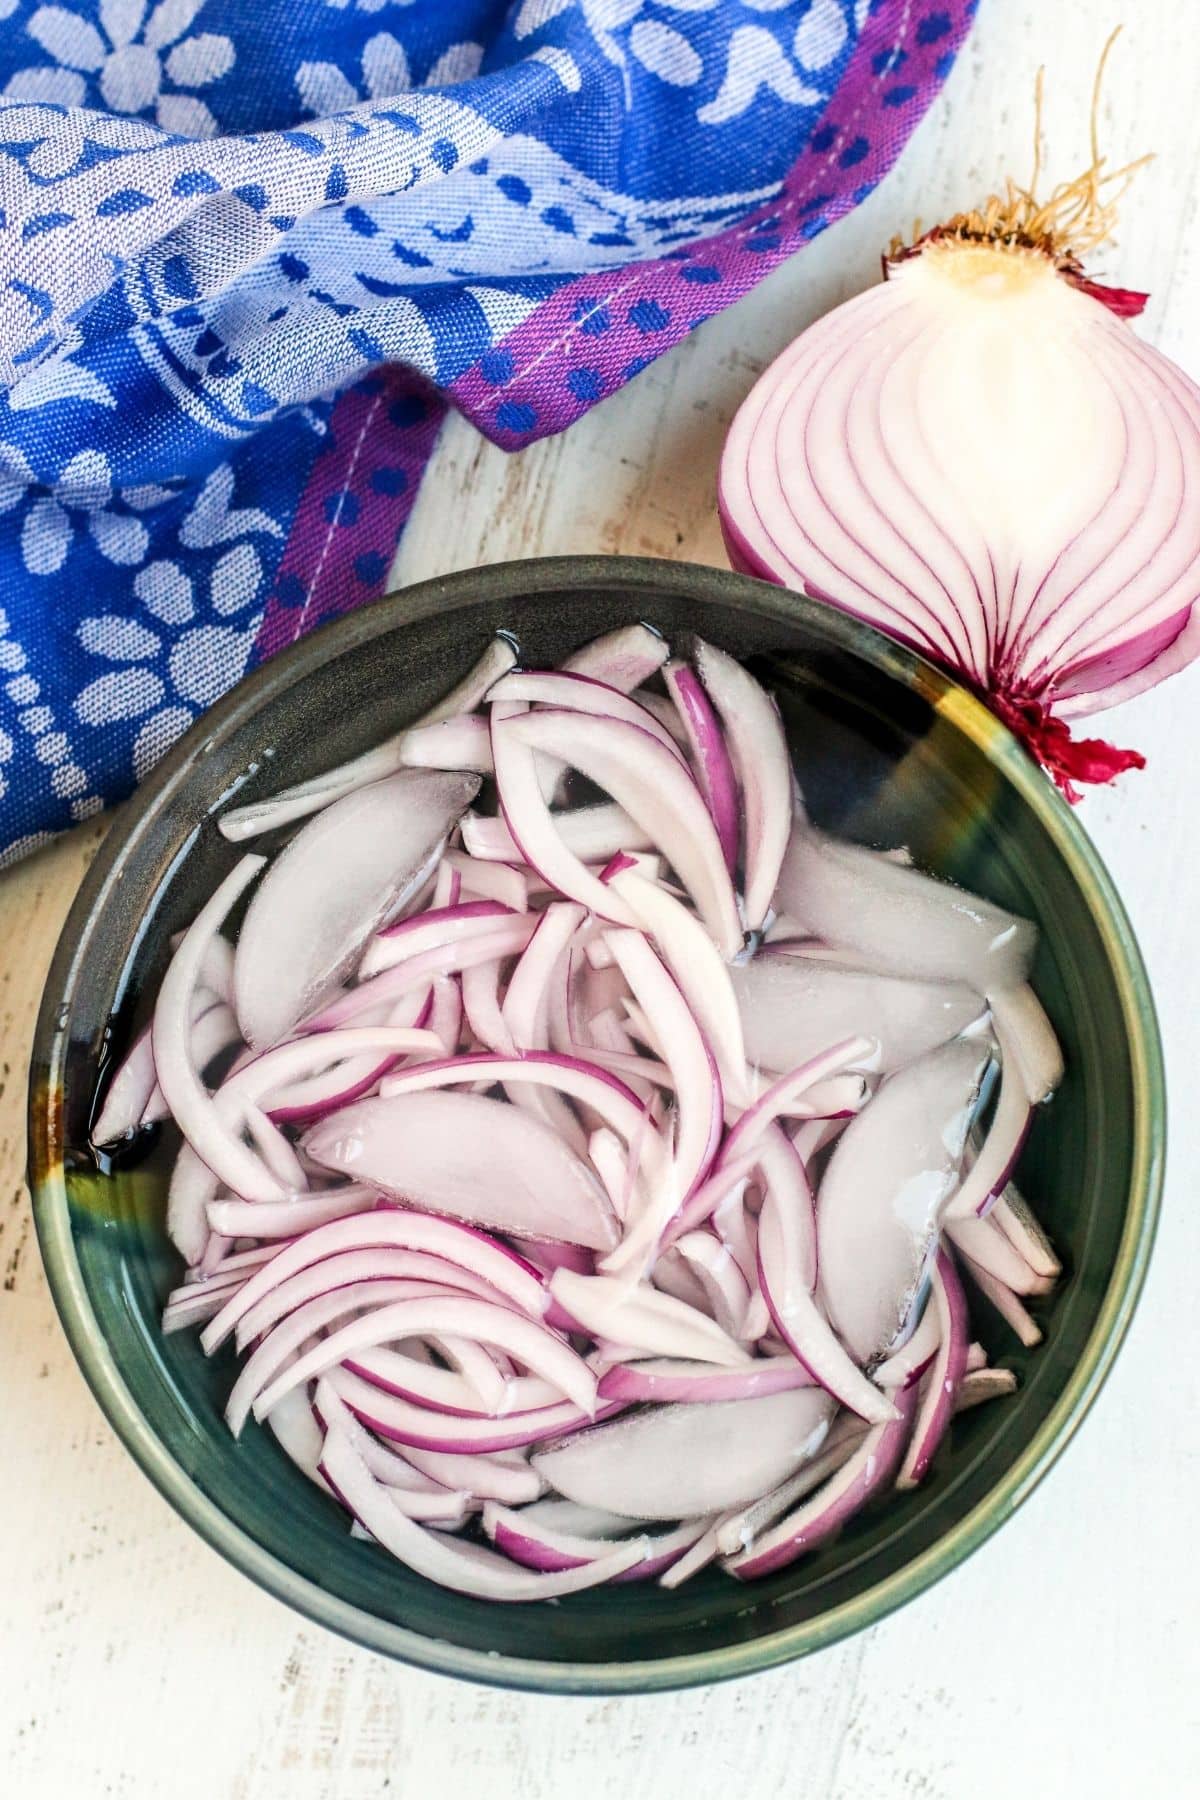 Onion slices soaking in a bowl of ice water